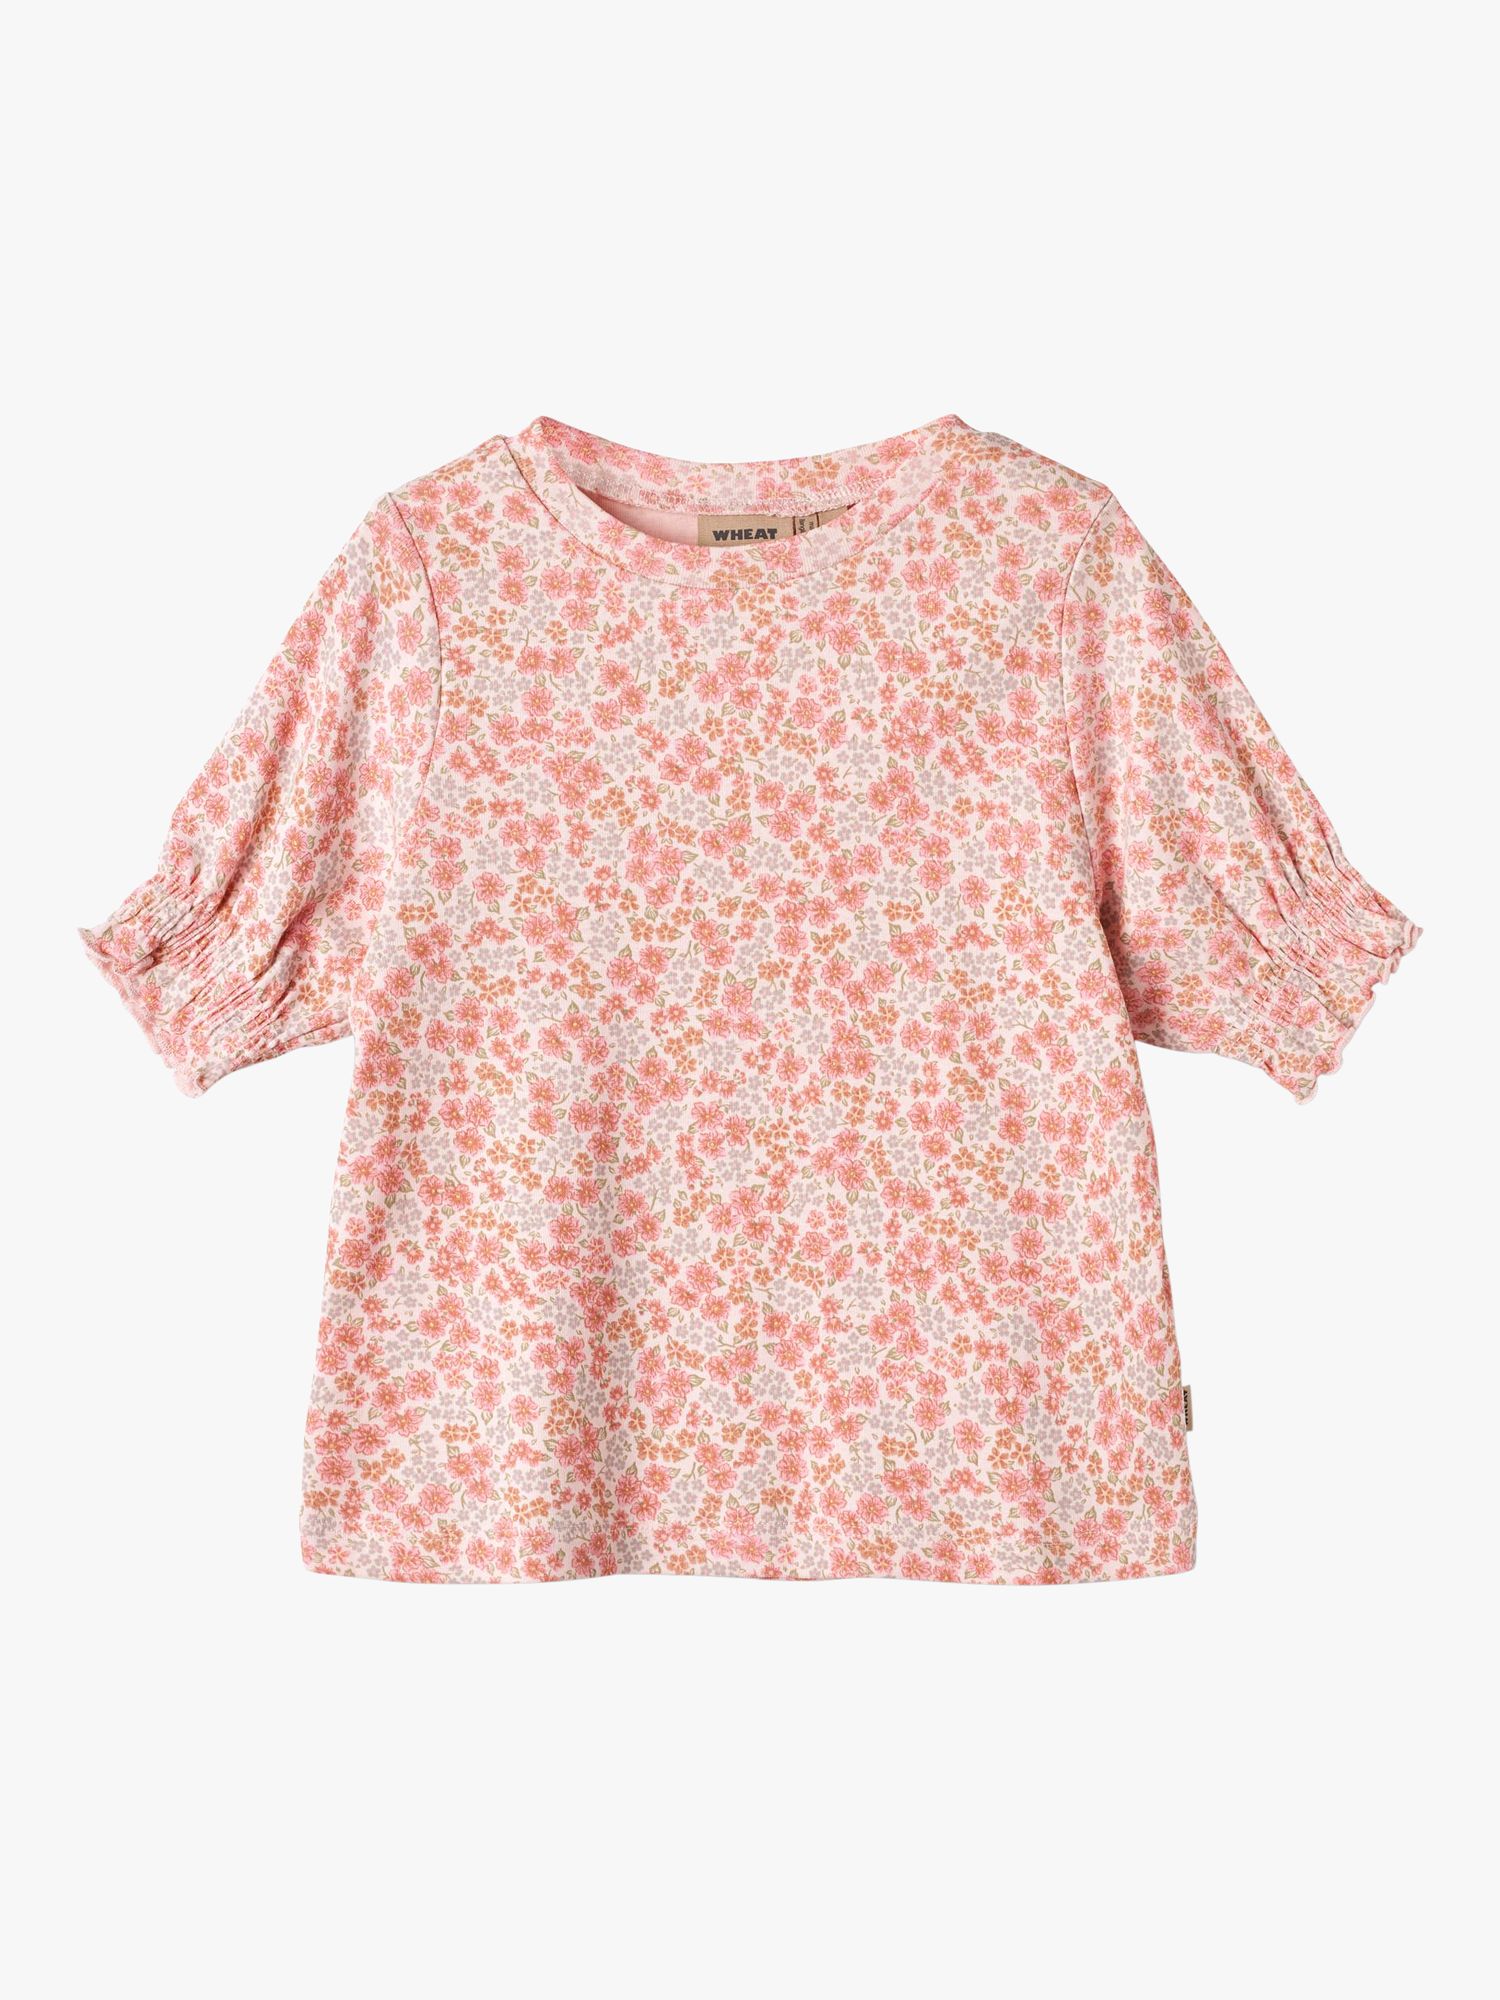 WHEAT Kids' Norma Floral Print Top, Pink, 3 years